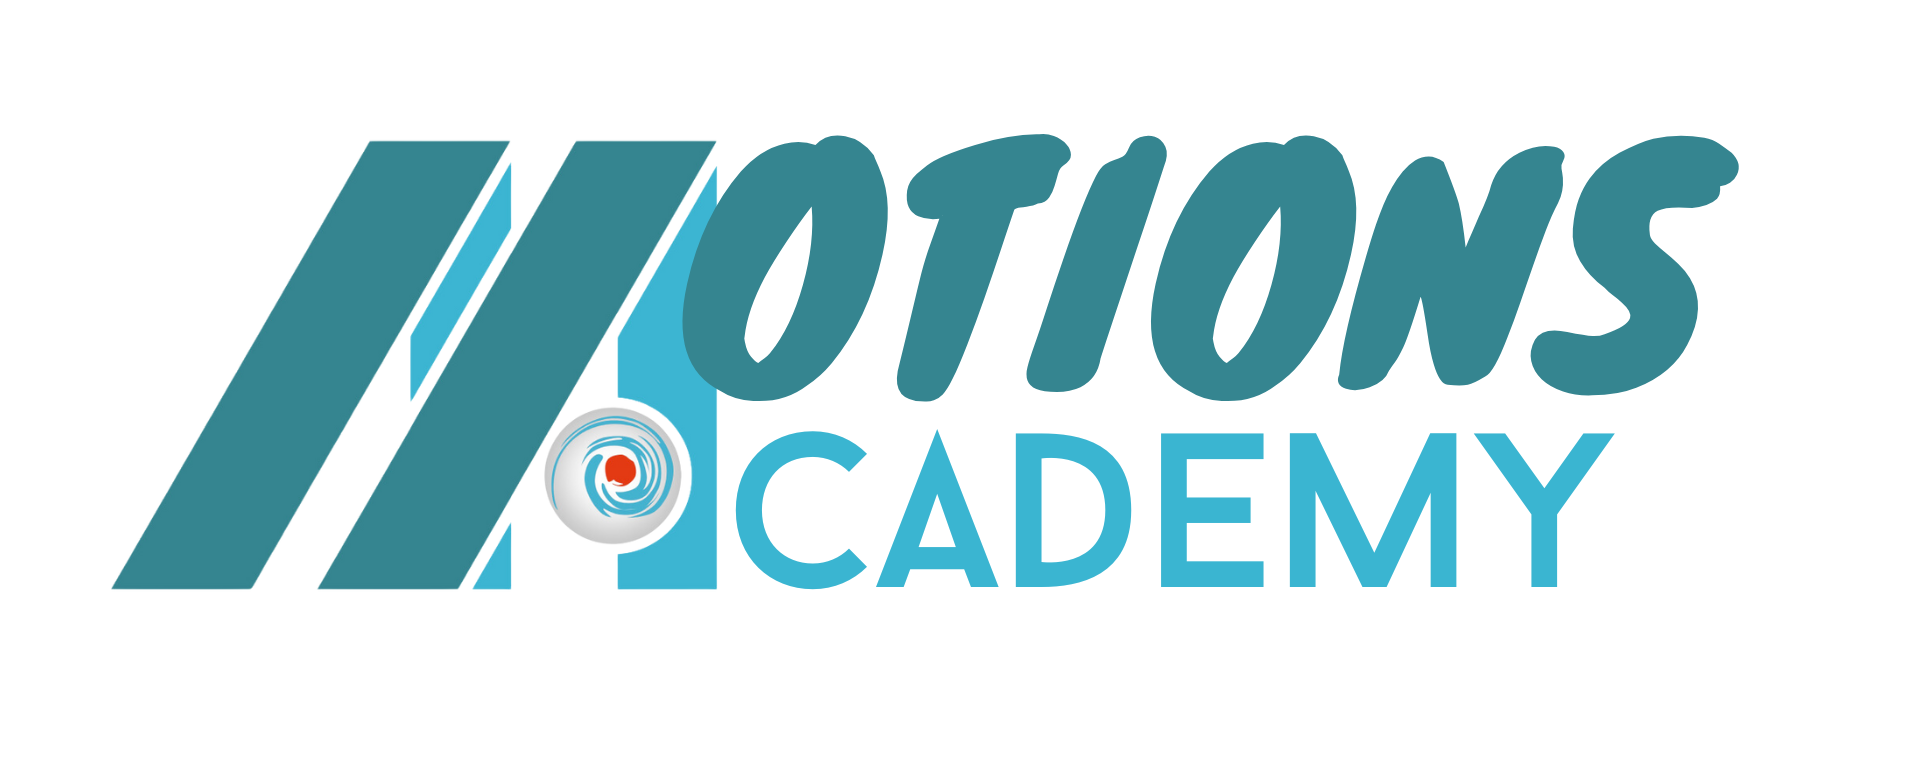 MOTIONS ACADEMY